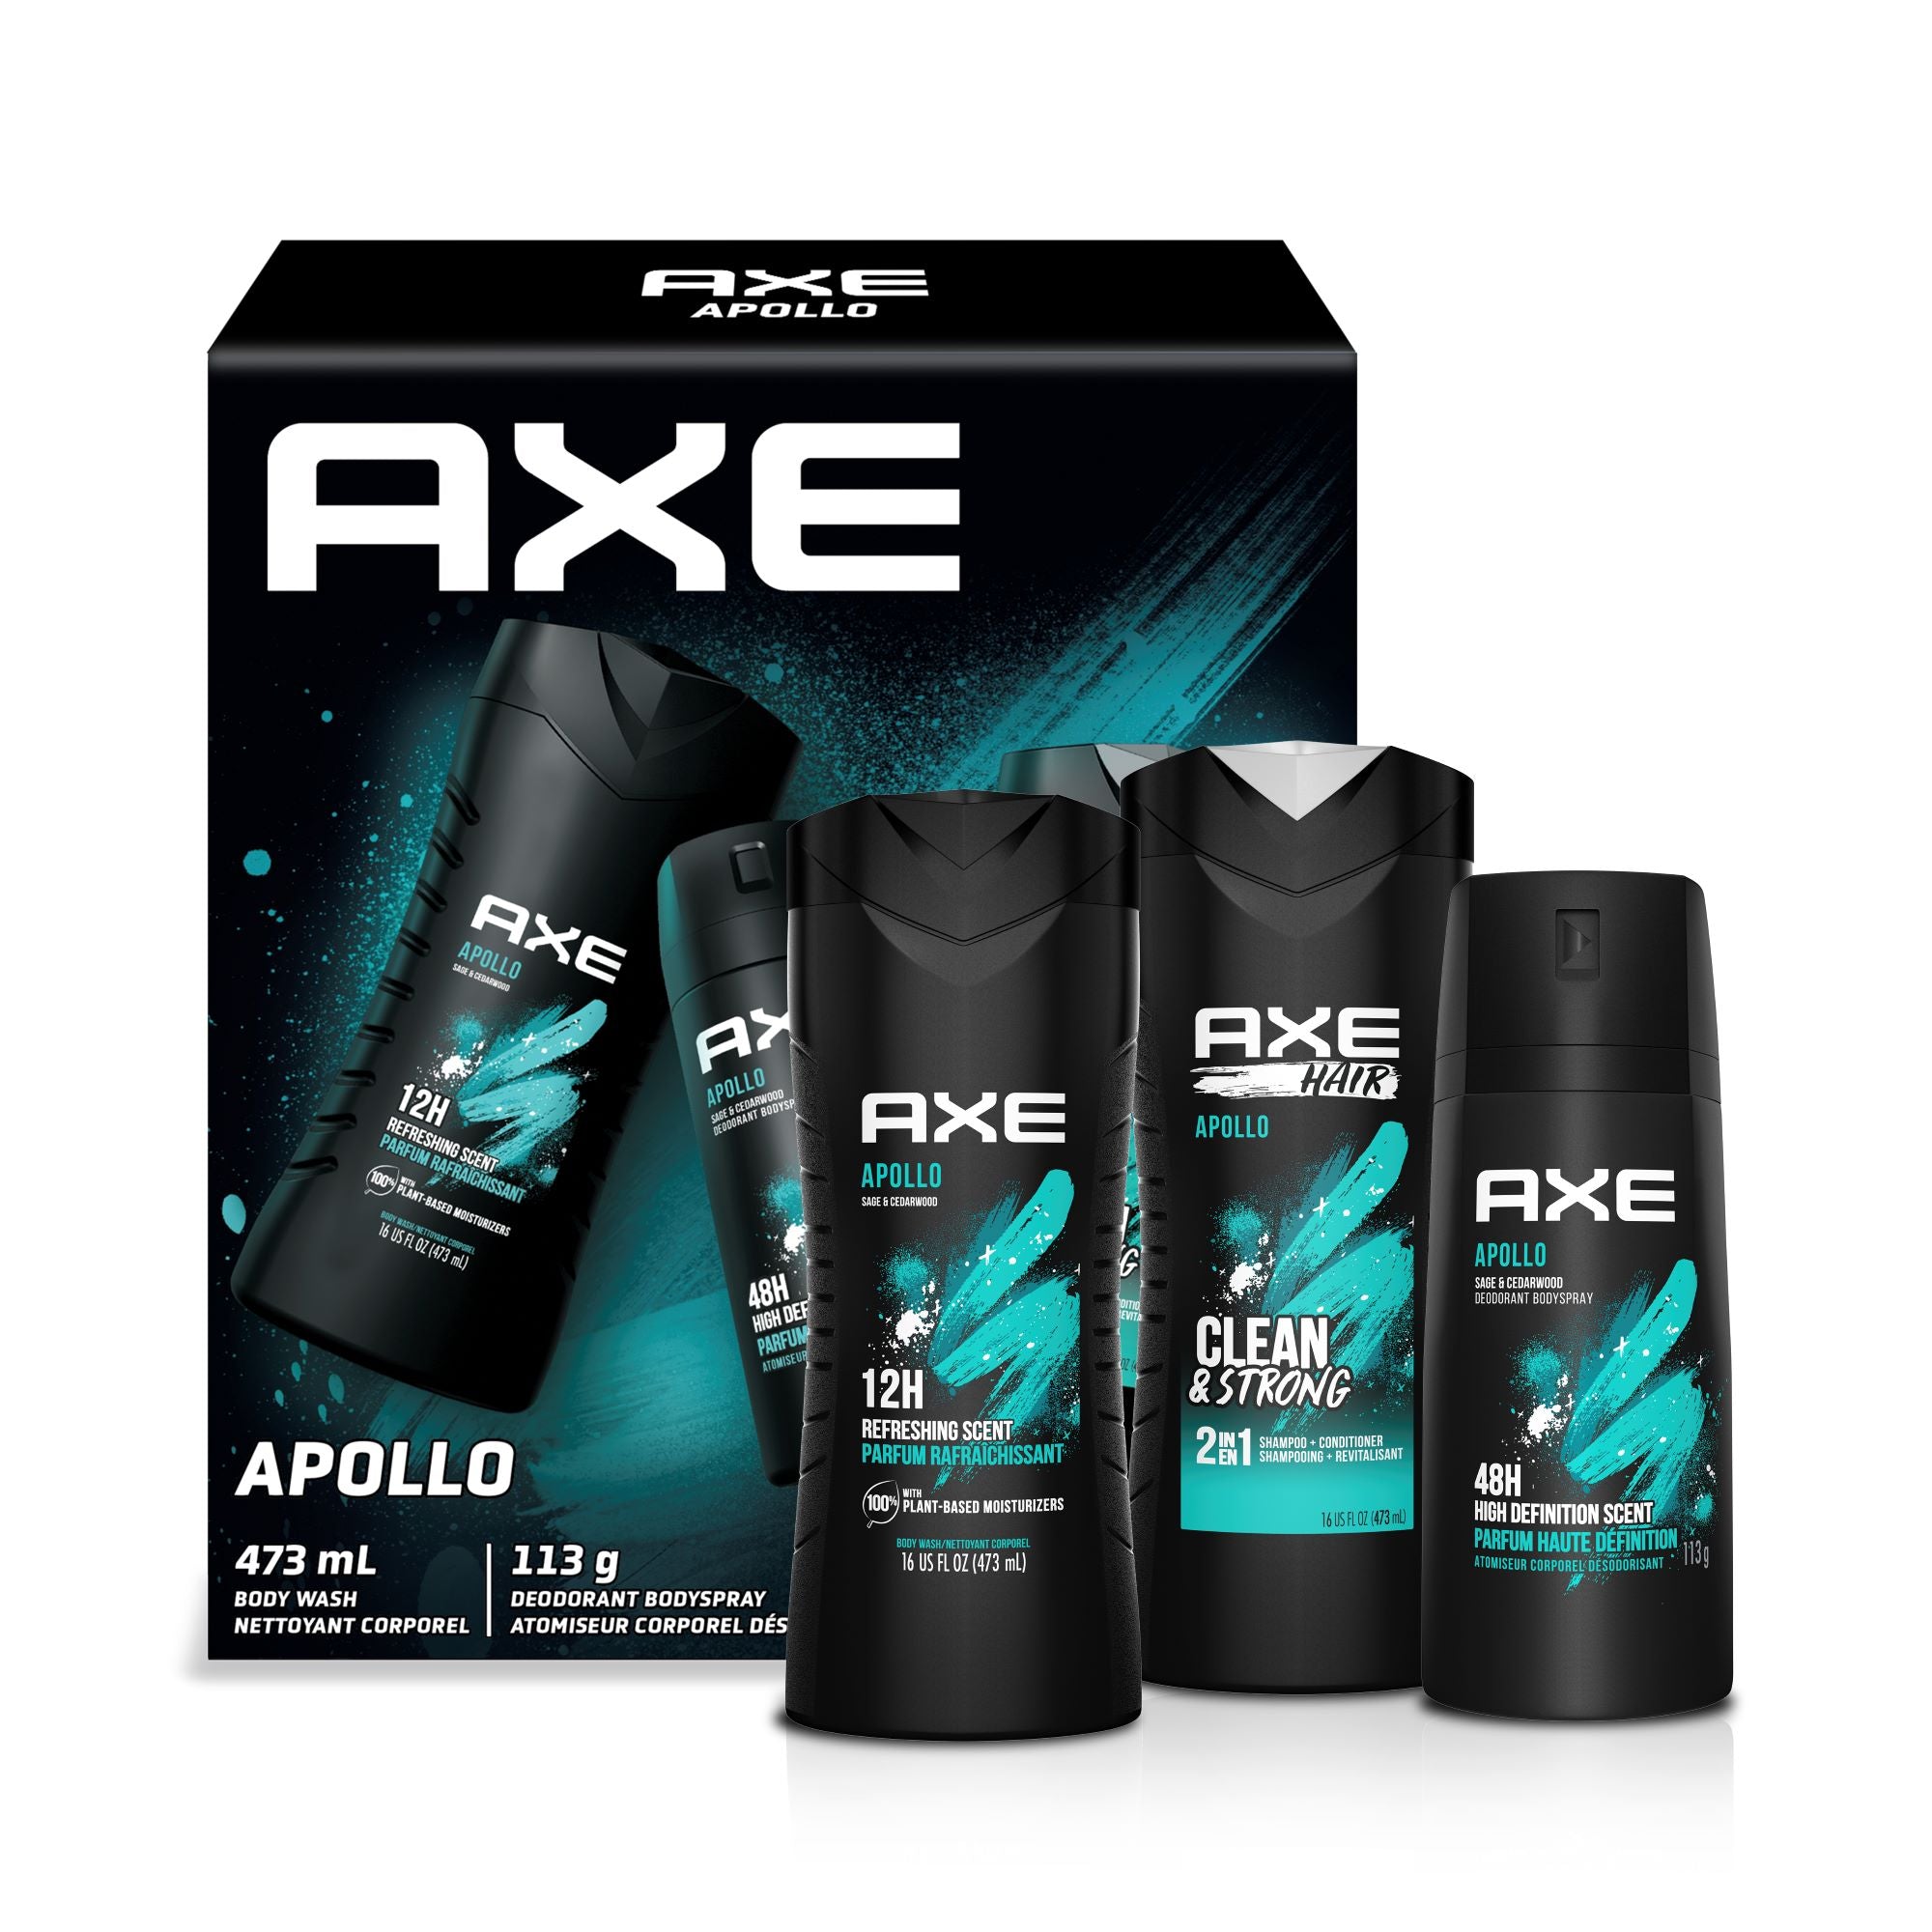 Showing the front angle view of the AXE Apollo Gift Set for Men giftpack box, with the 3 products included sitting in front of the box.